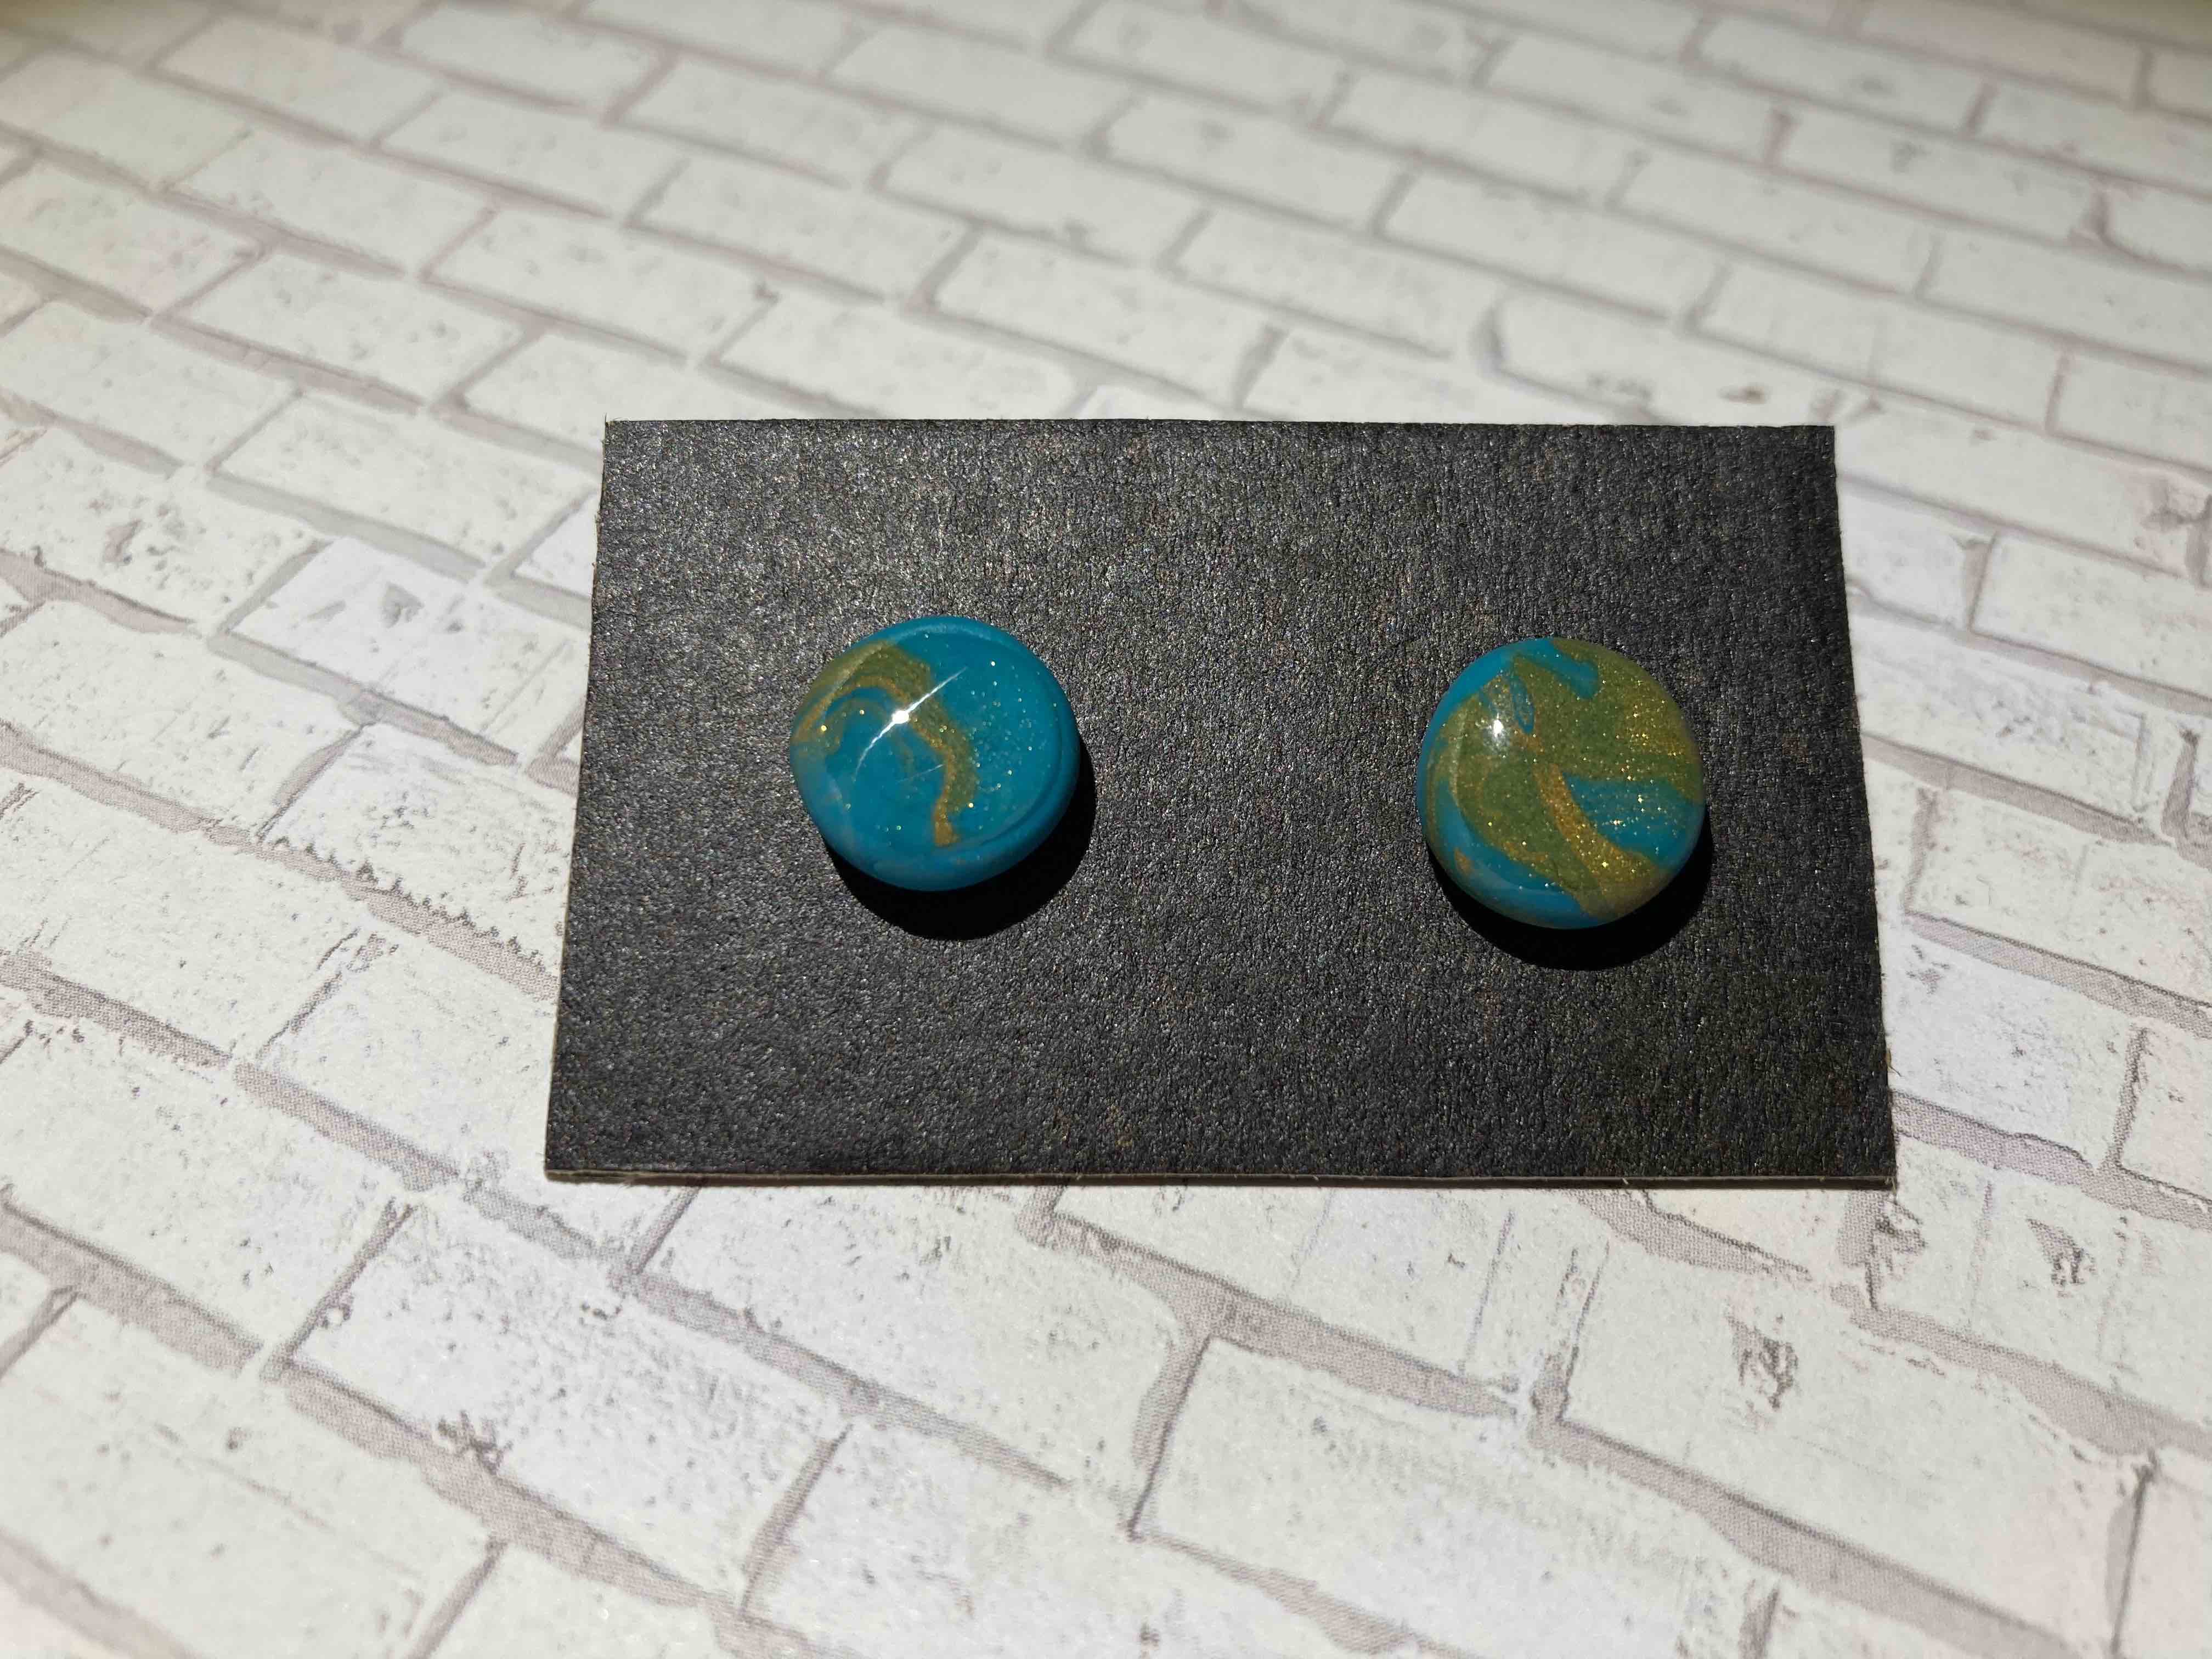 Earth Button Studs | Marble green/blue/gold polymer button studs with gold posts and resin coating. Nickel free brass.